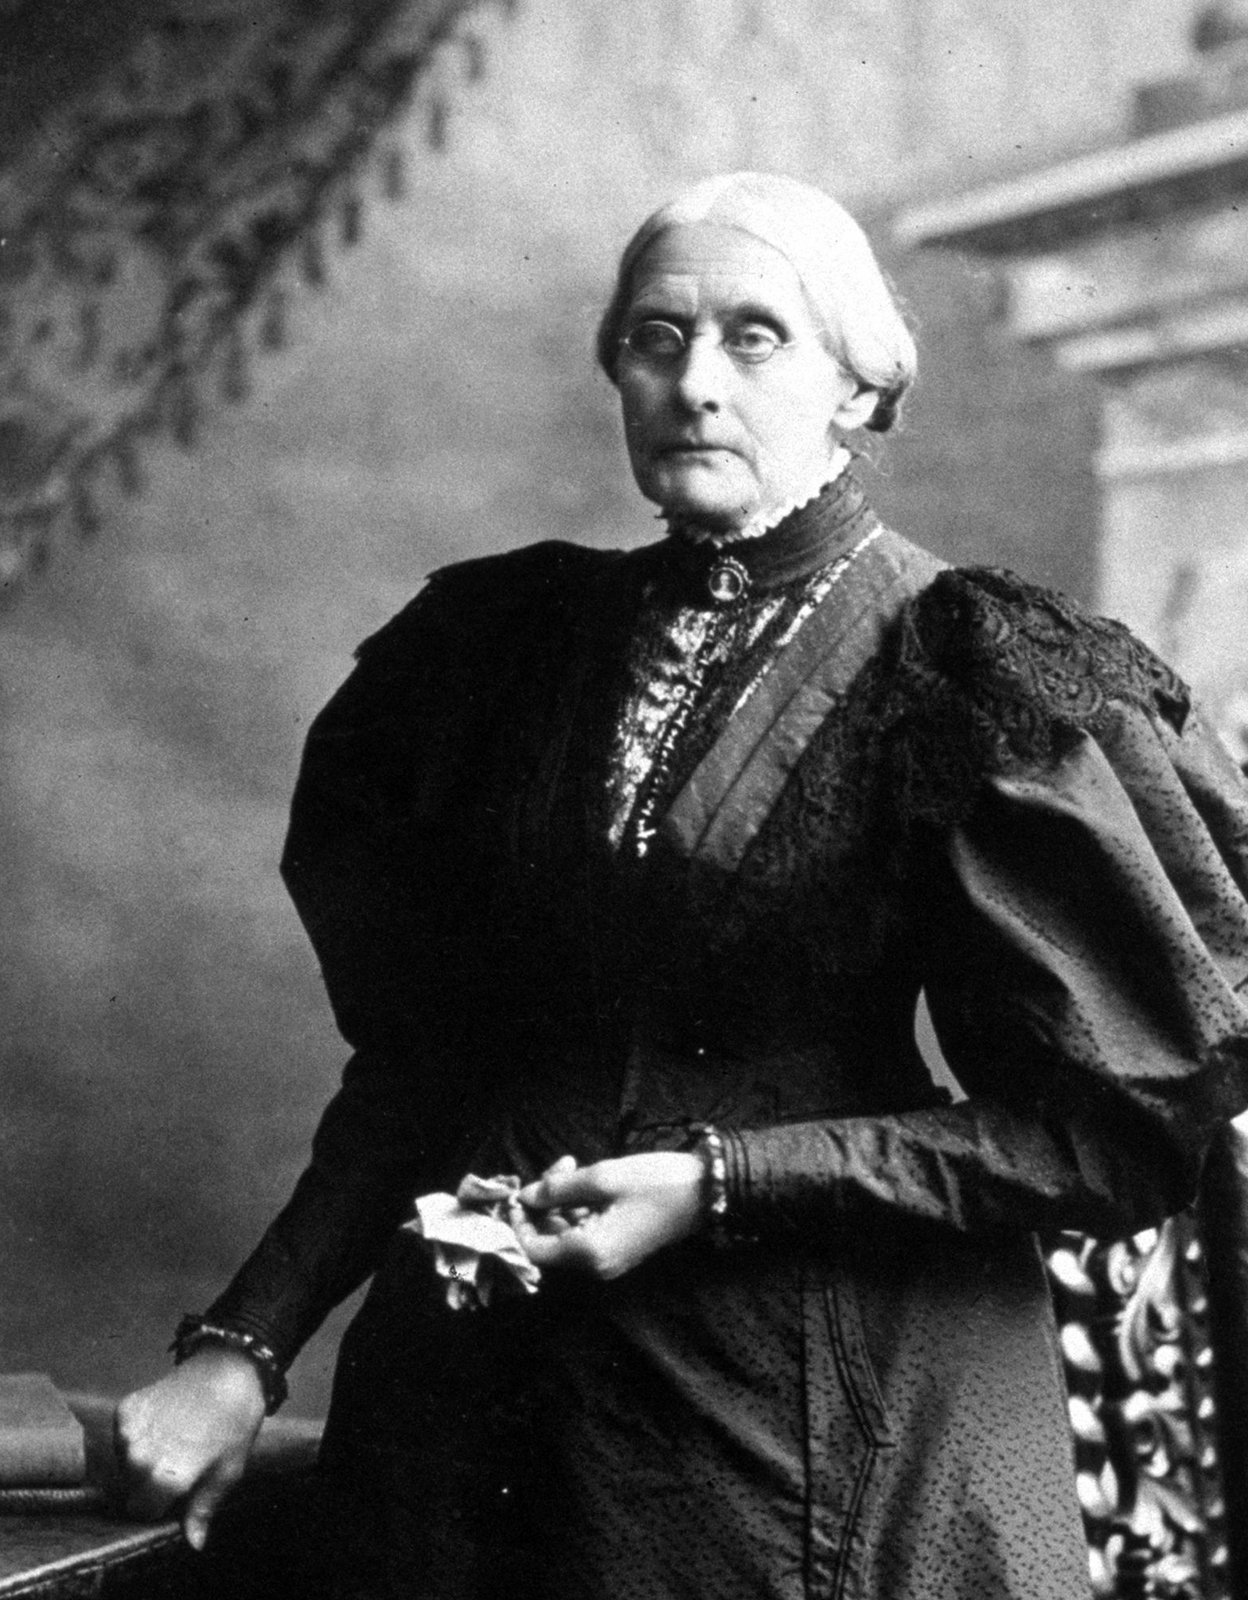 Susan B. Anthony | Biography, Suffrage, & Facts | Britannica